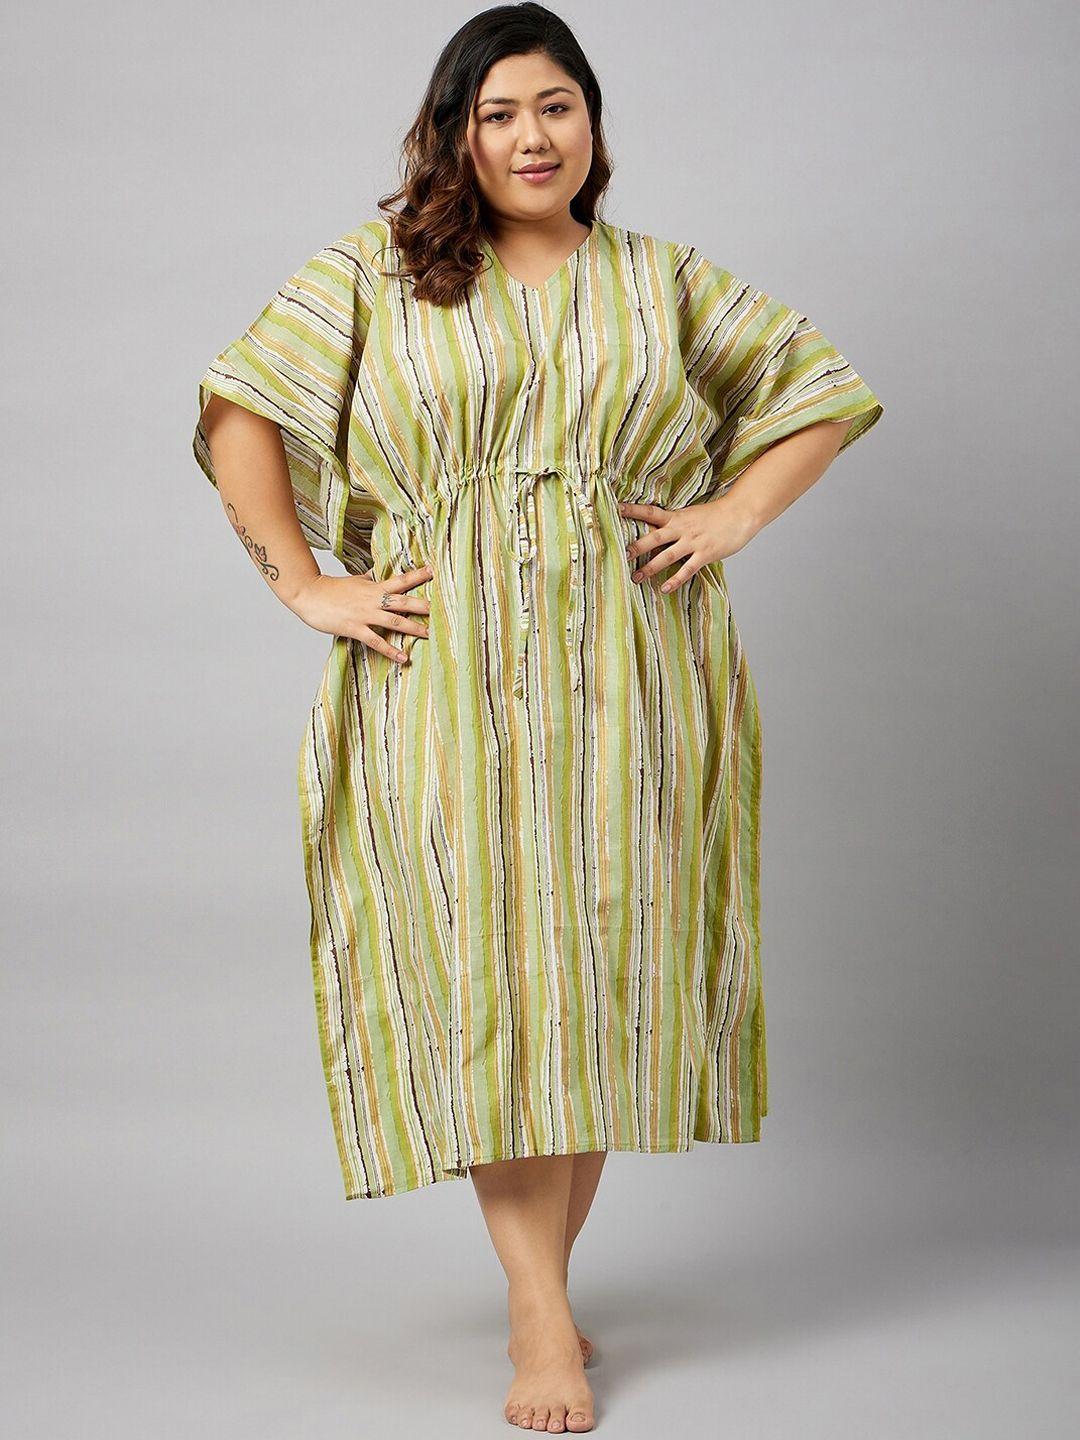 curves by zerokaata plus size striped pure cotton kaftan cover up dress